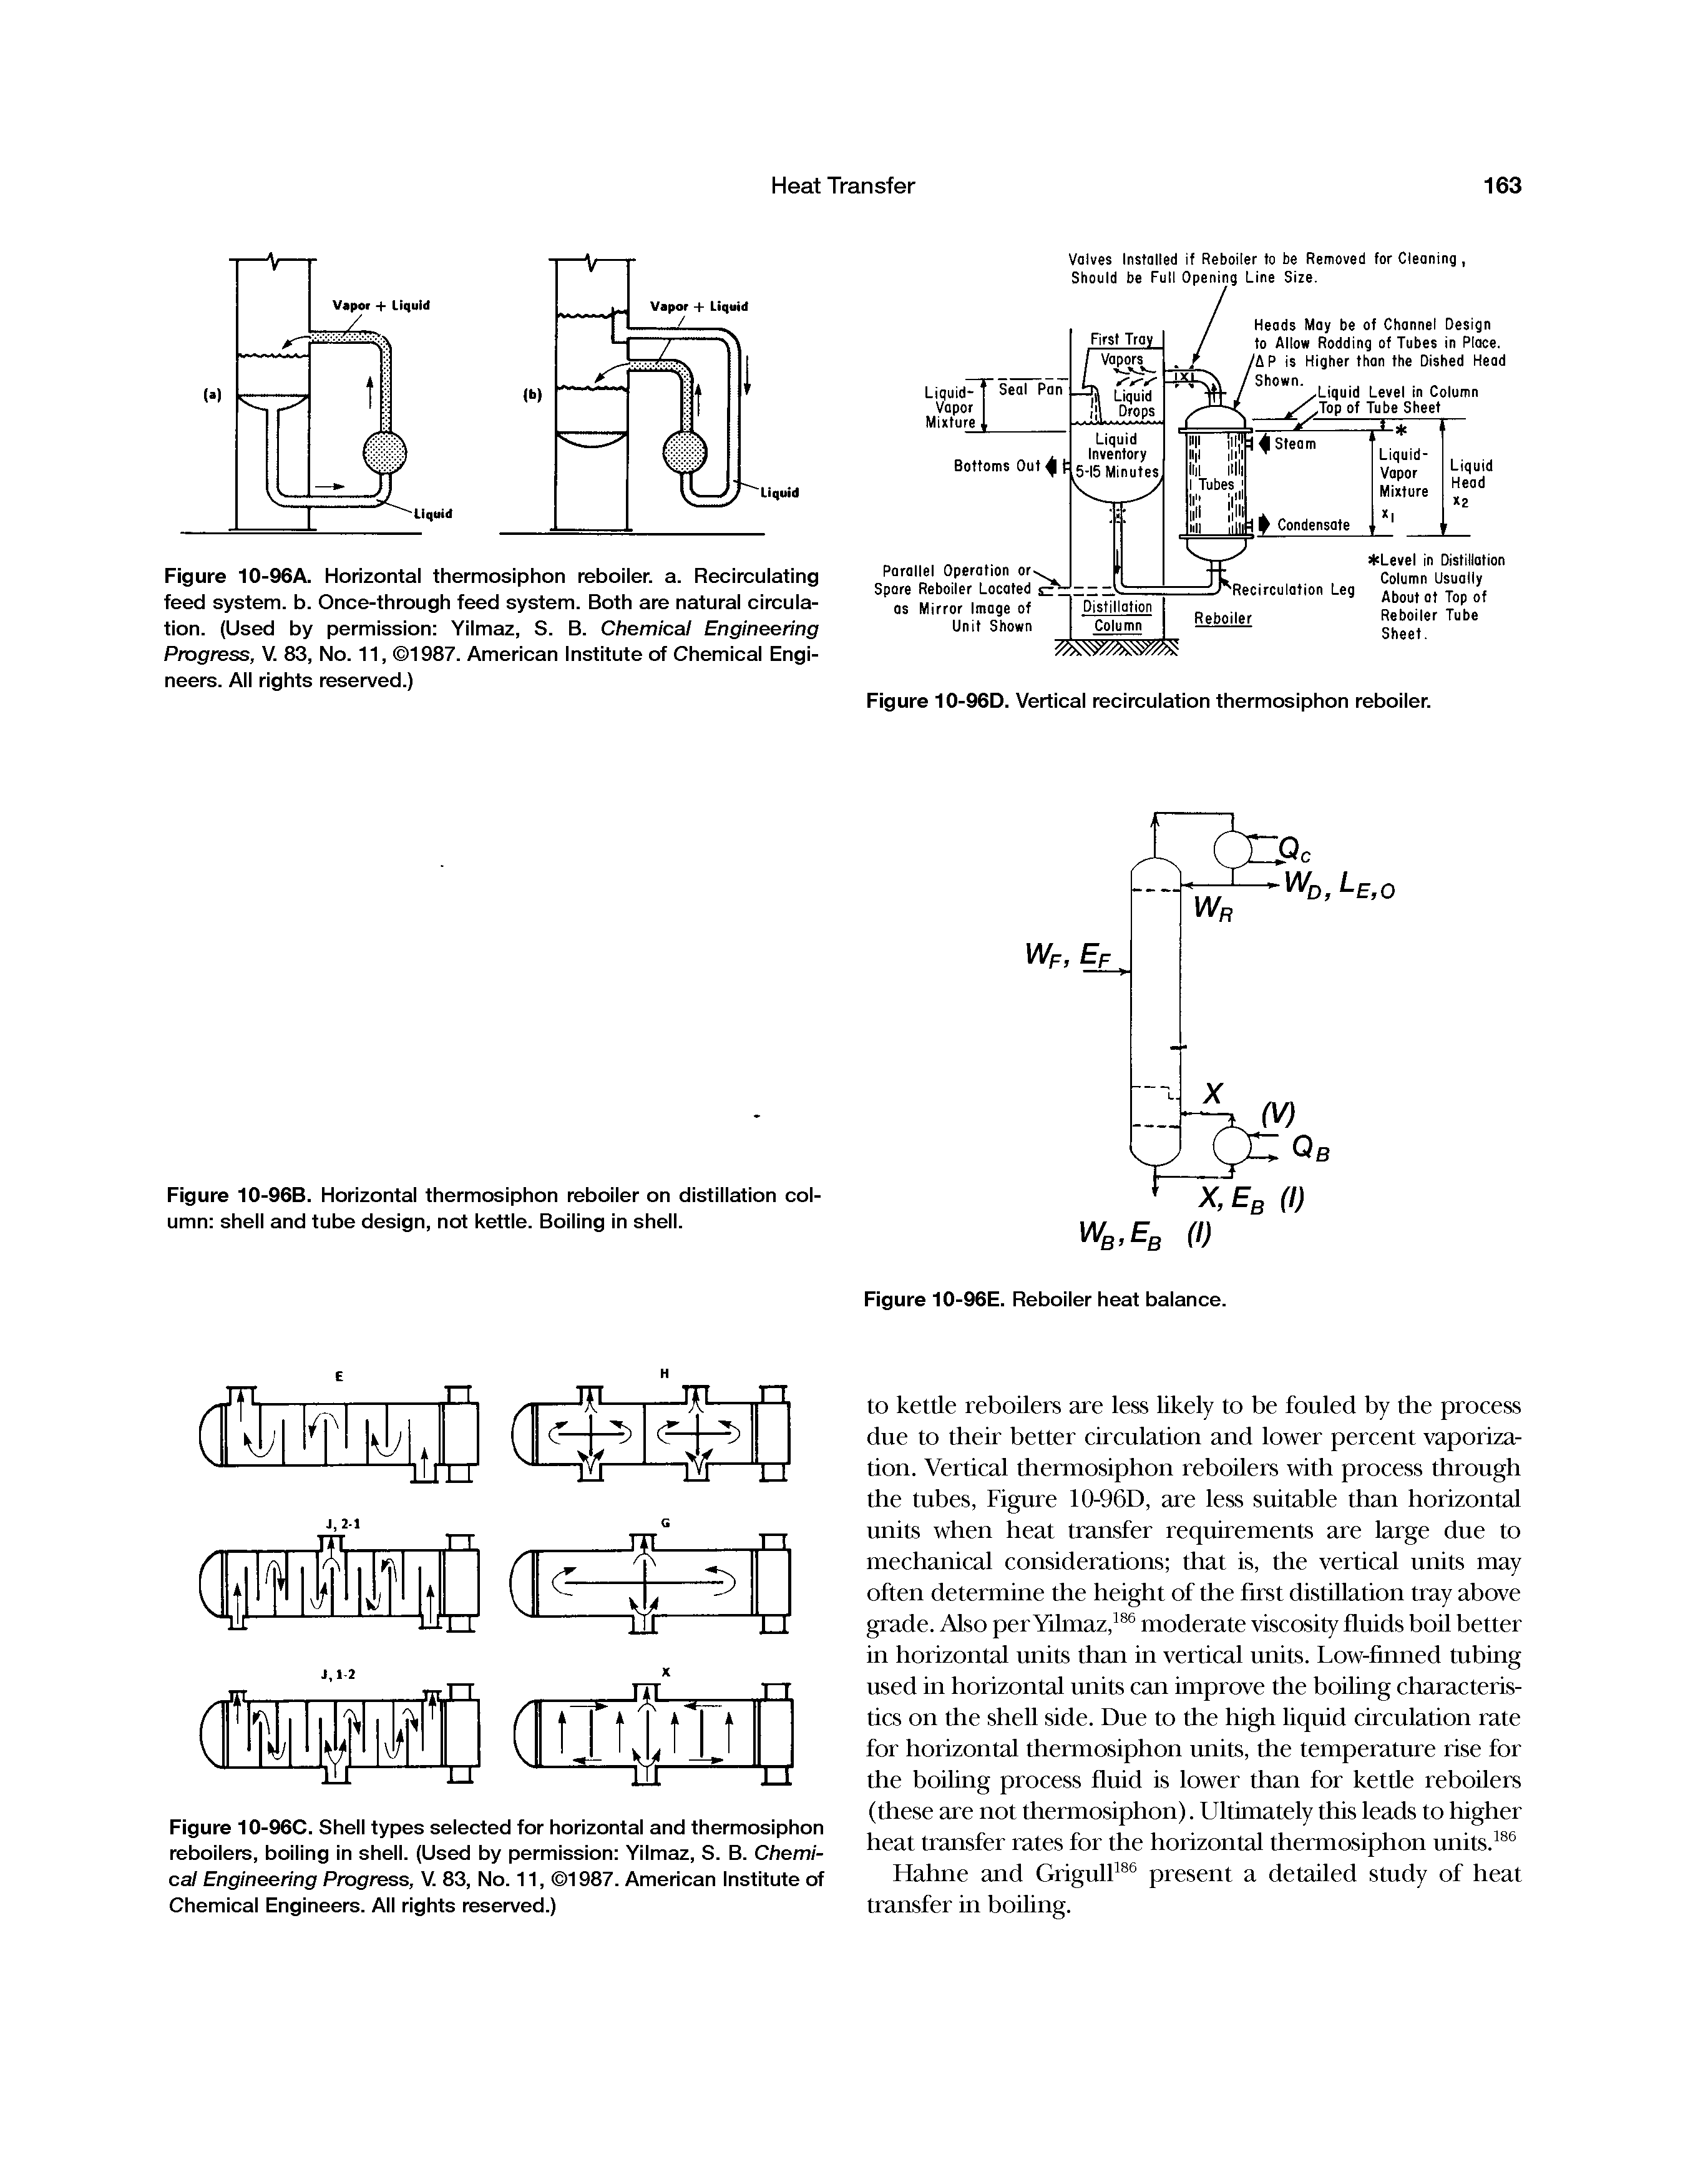 Figure 10-96C. Shell types selected for horizontal and thermosiphon reboilers, boiling in shell. (Used by permission Yilmaz, S. B. Chemical Engineering Progress, V. 83, No. 11, 1987. American Institute of Chemical Engineers. All rights reserved.)...